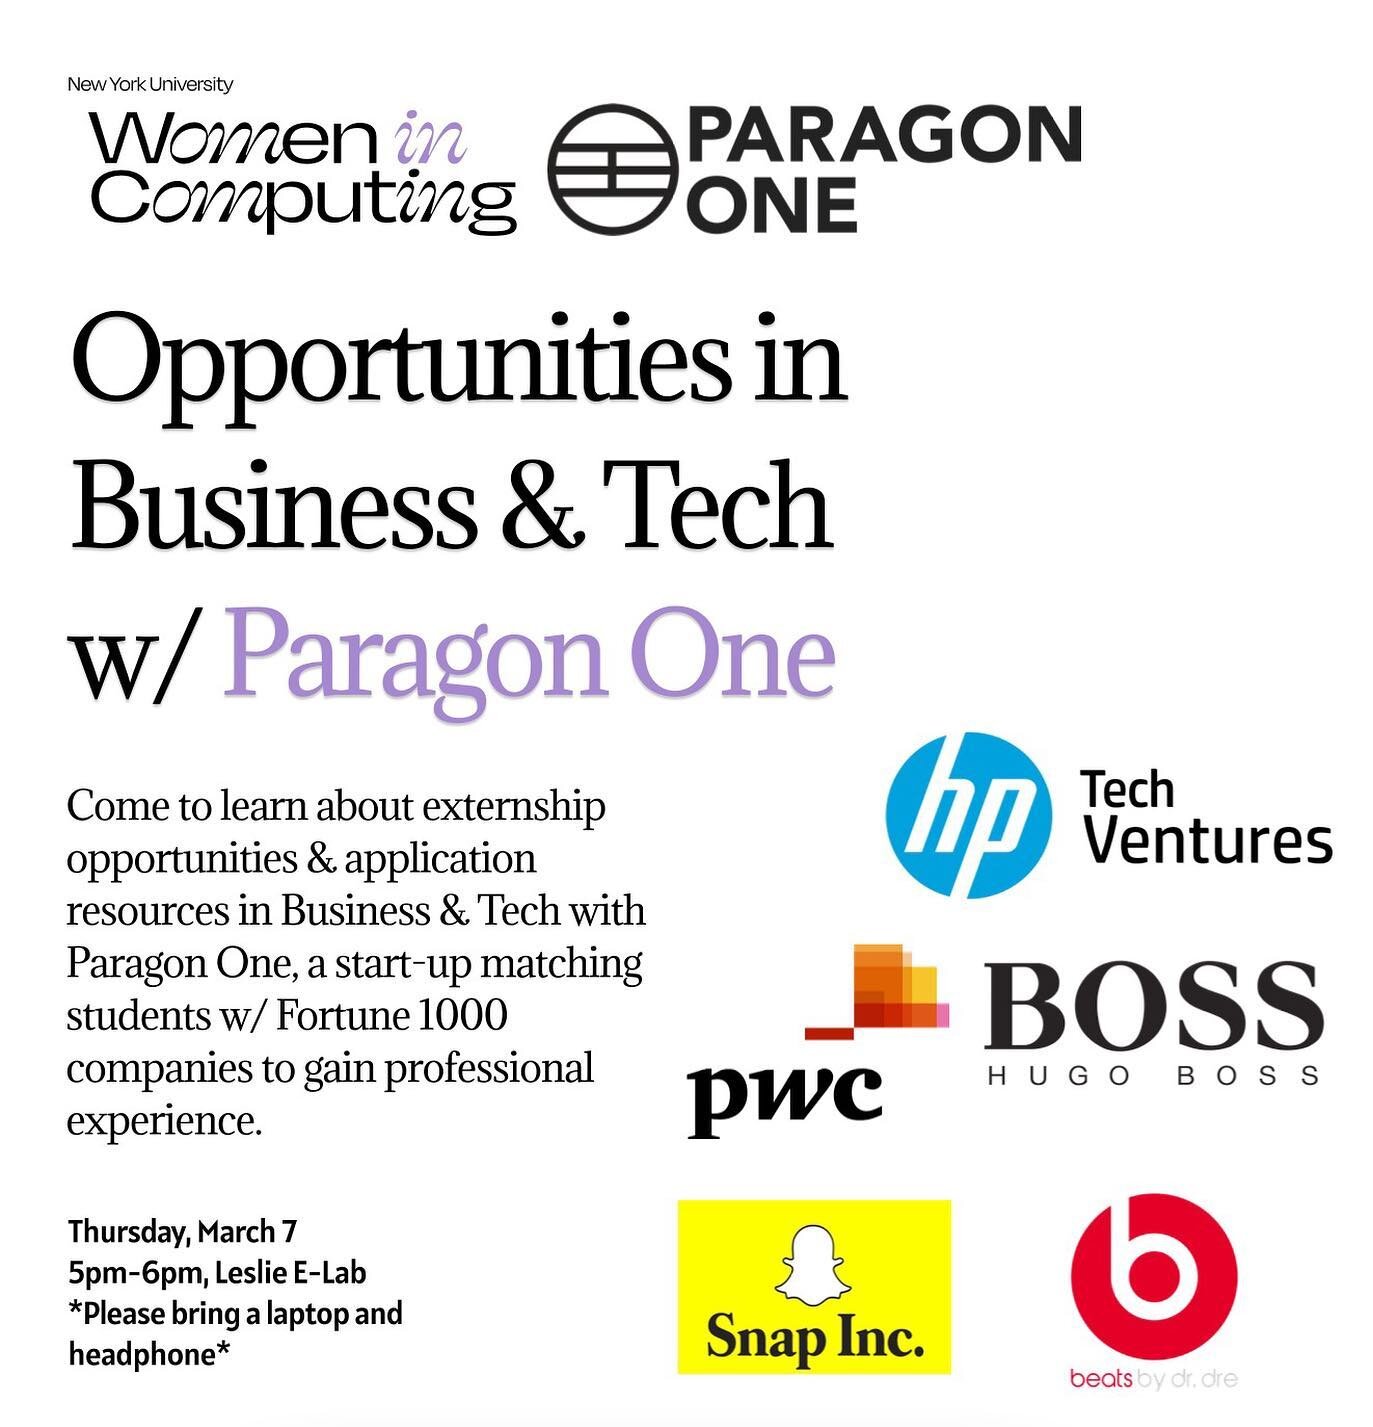 Talk to the Community Manager at Paragon One as well as get advice on the application process from NYU alumni&rsquo;s of the program! RSVP link in bio